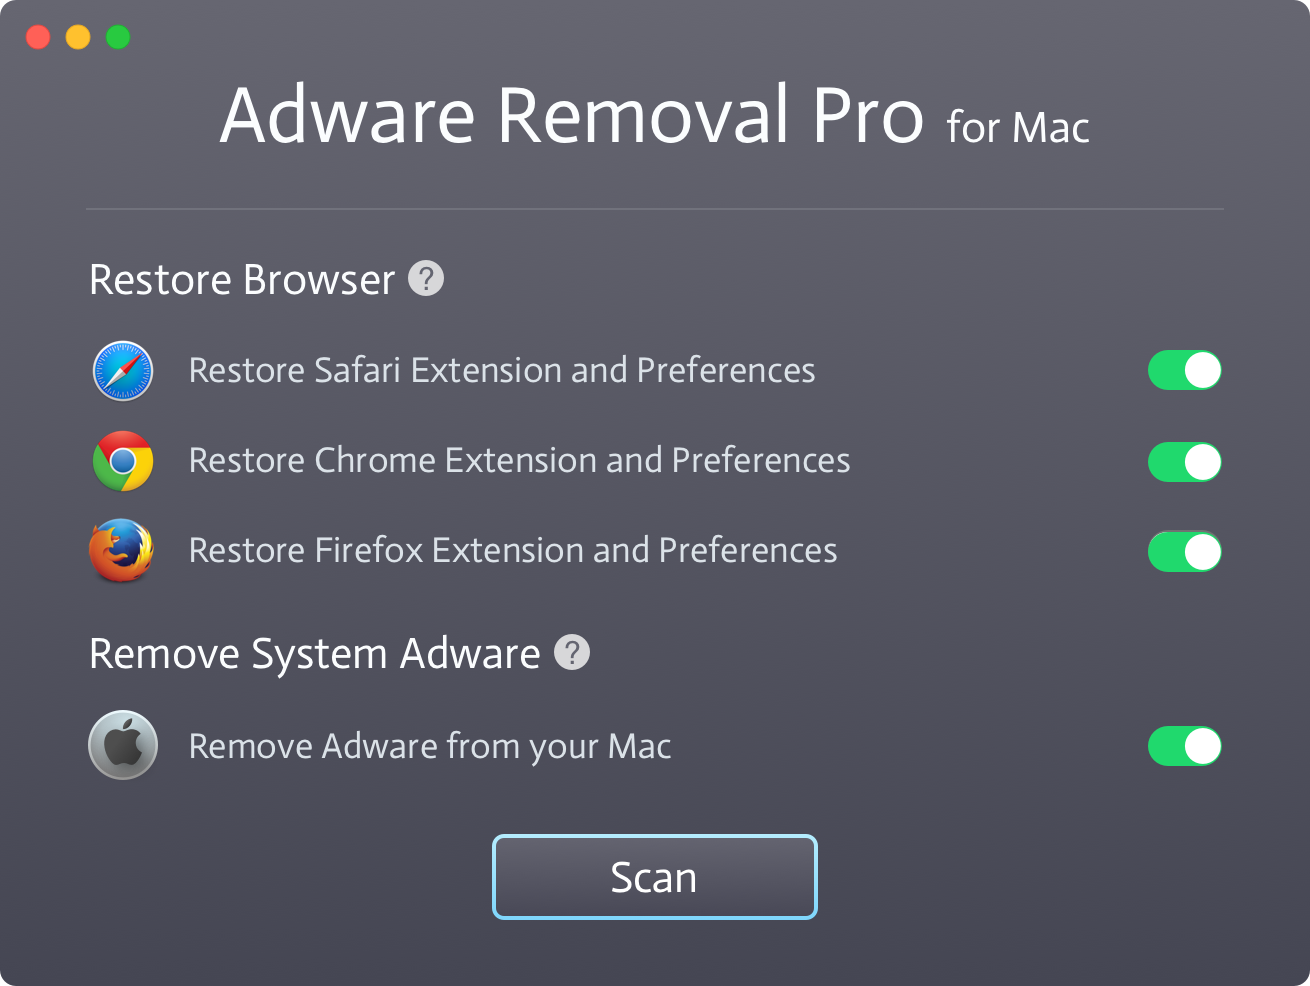 adware cleaner 2014